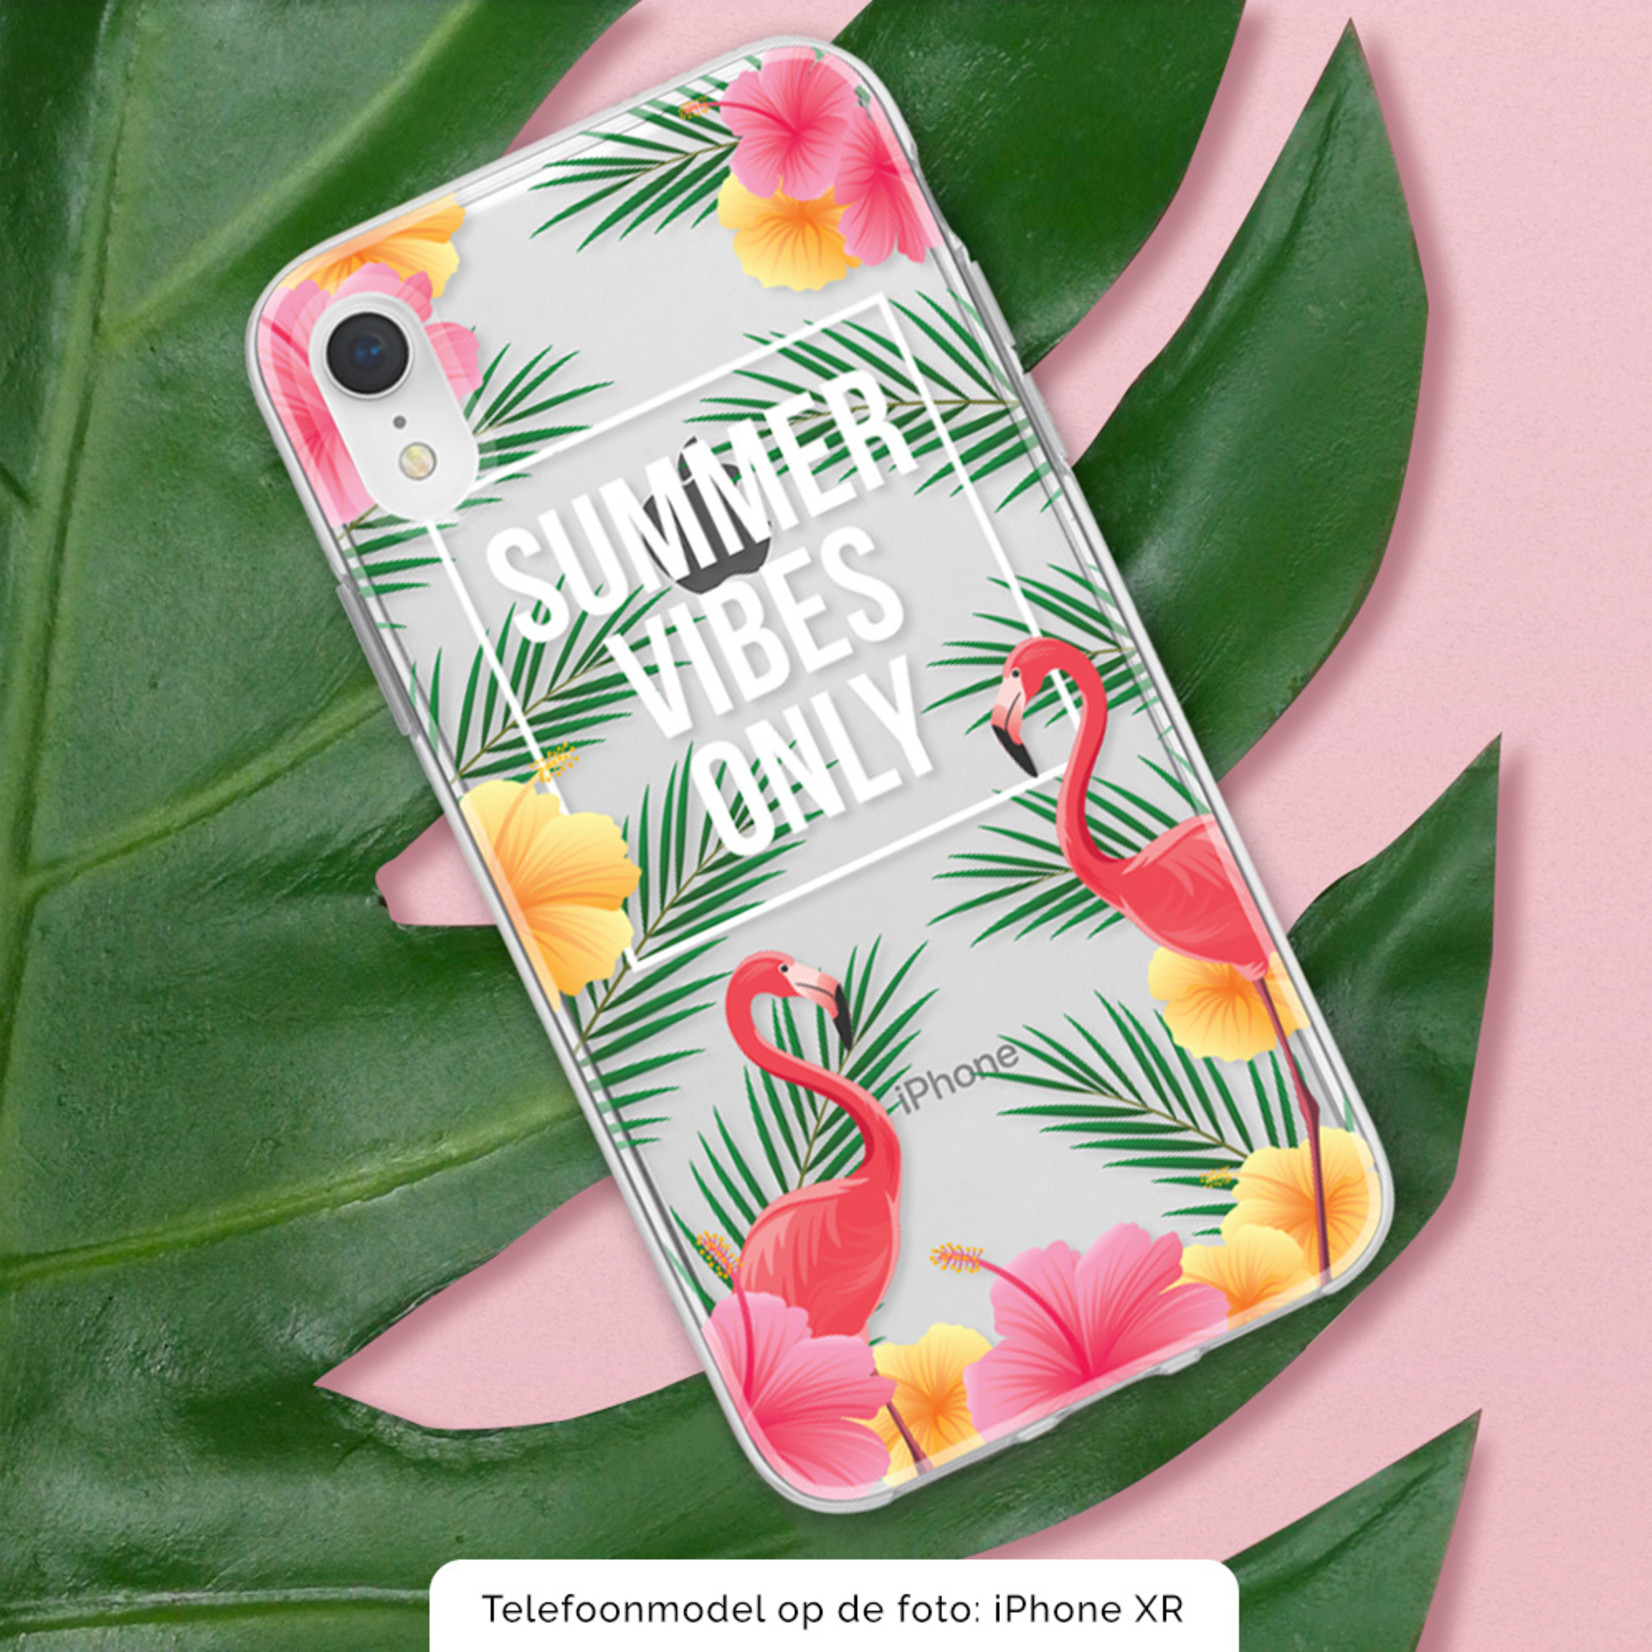 FOONCASE Iphone X Cover - Summer Vibes Only